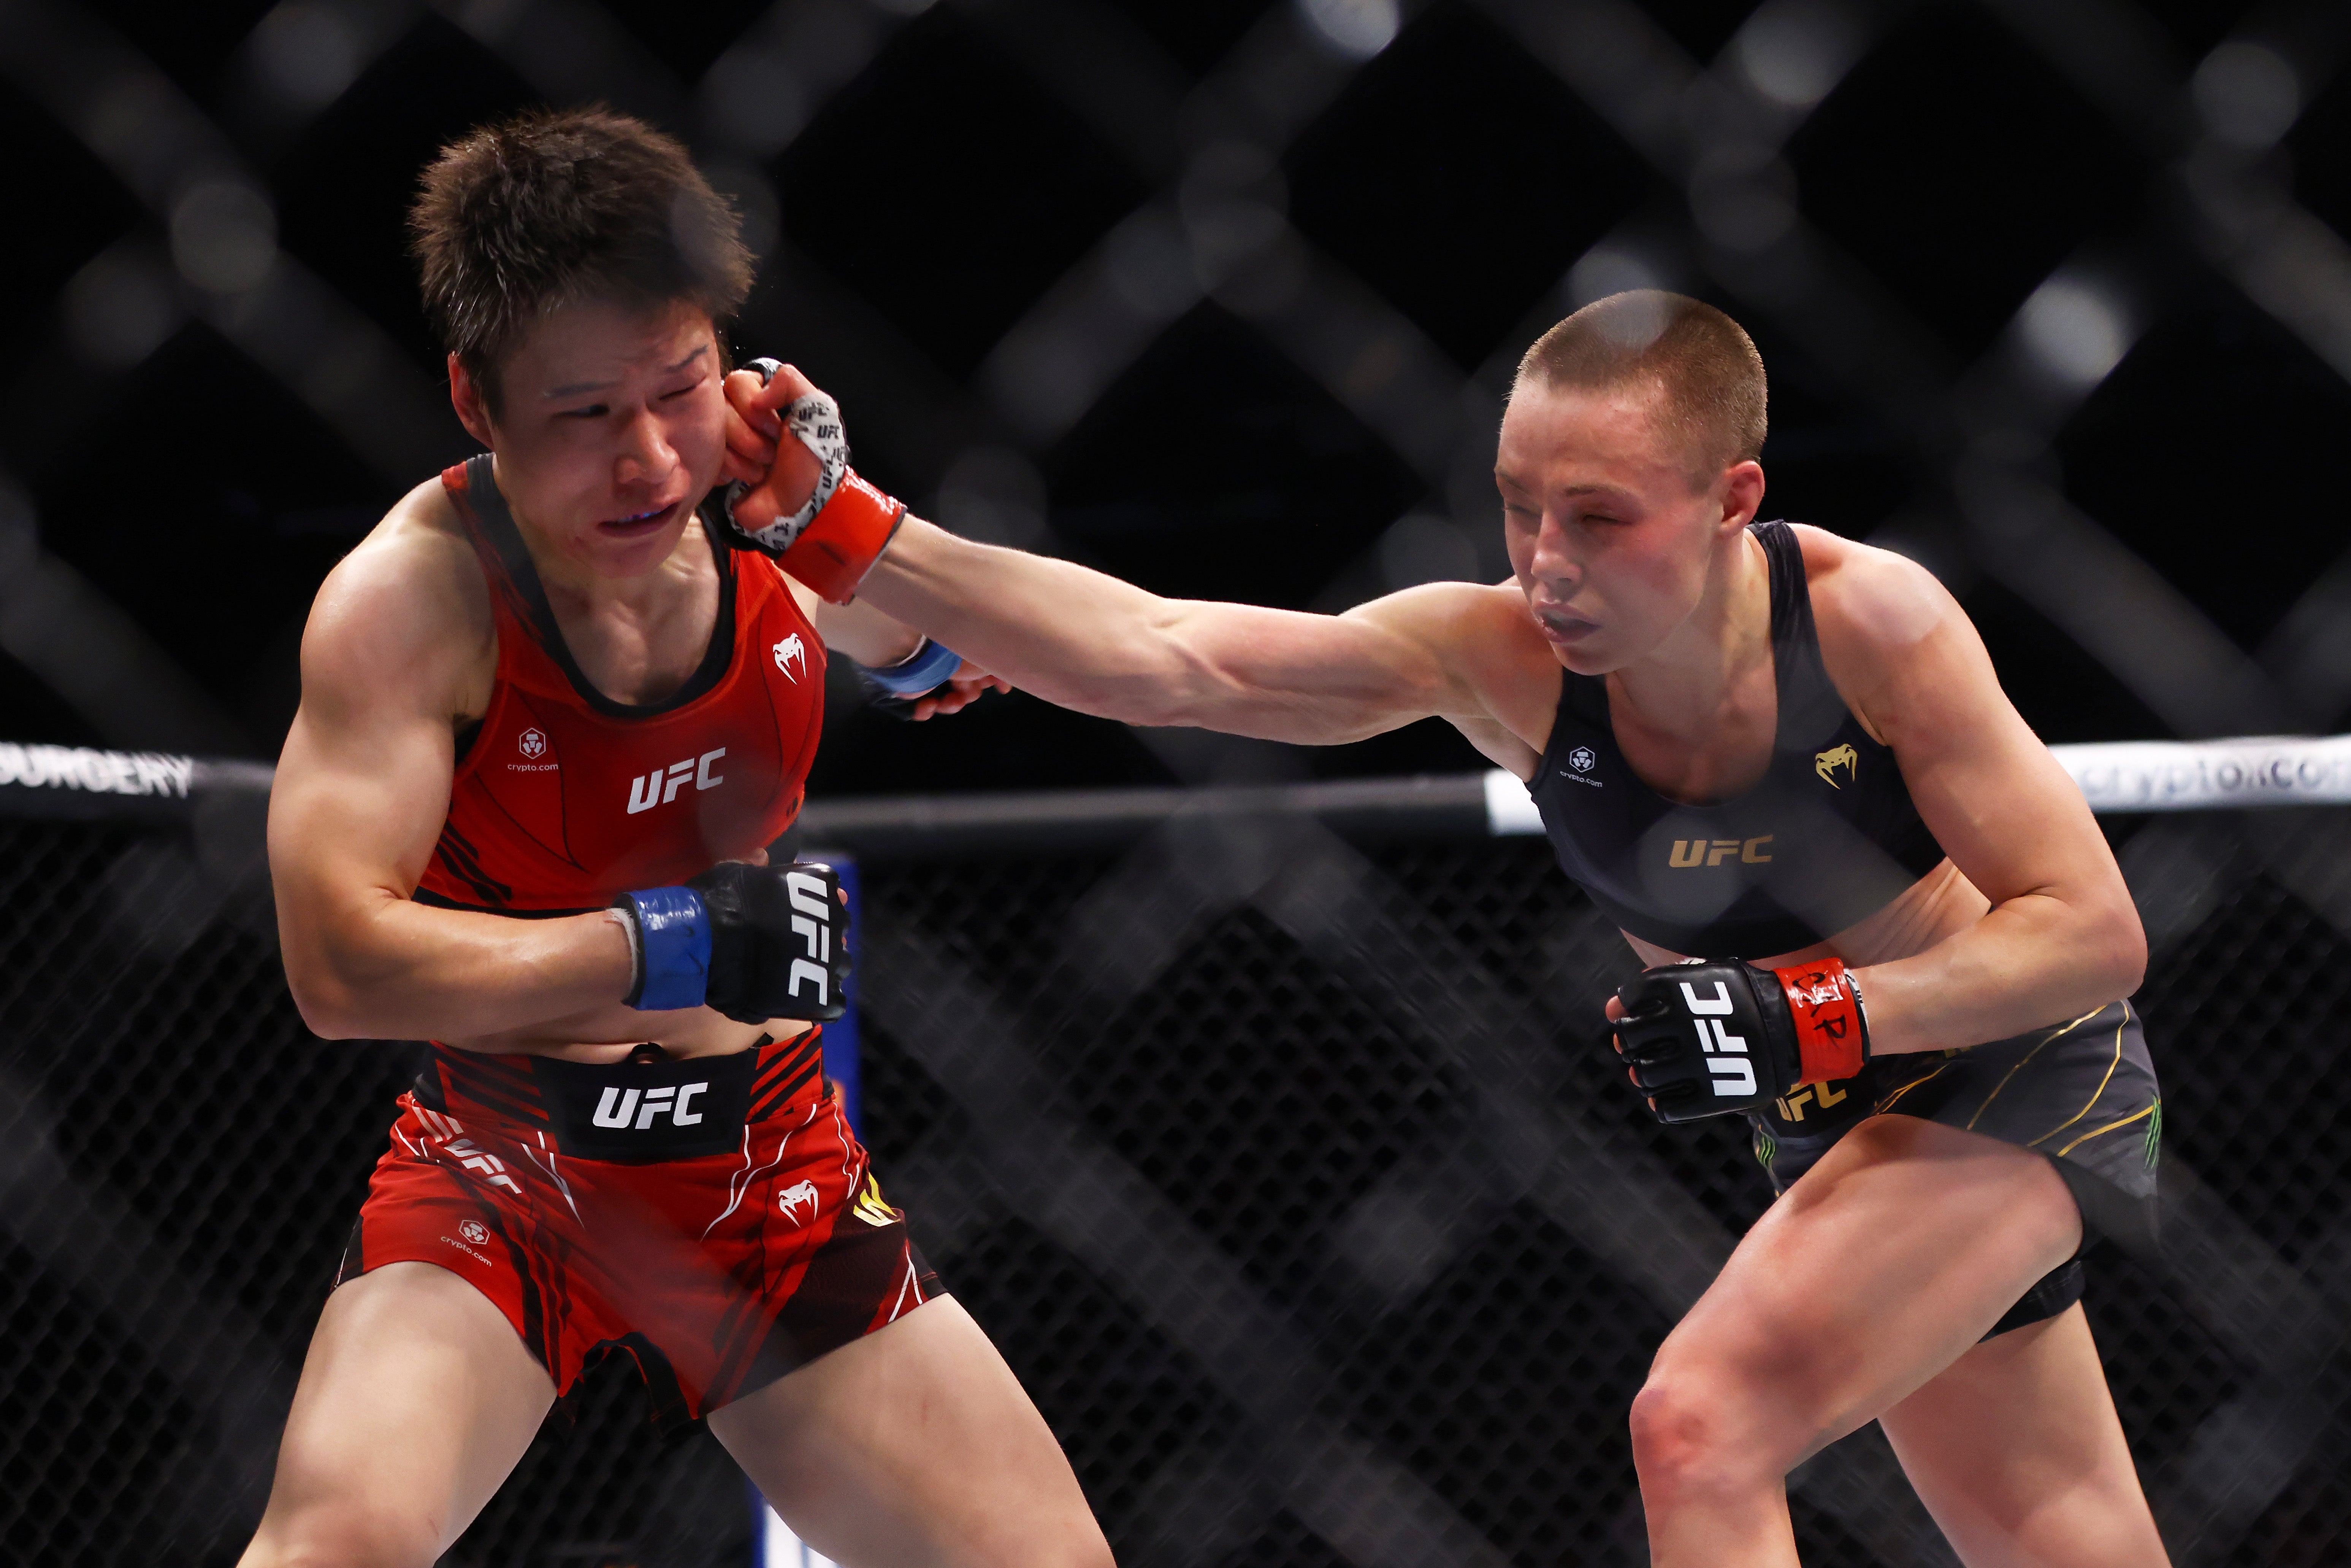 Weili Zhang (left) could not regain the strawweight title from Rose Namajunas